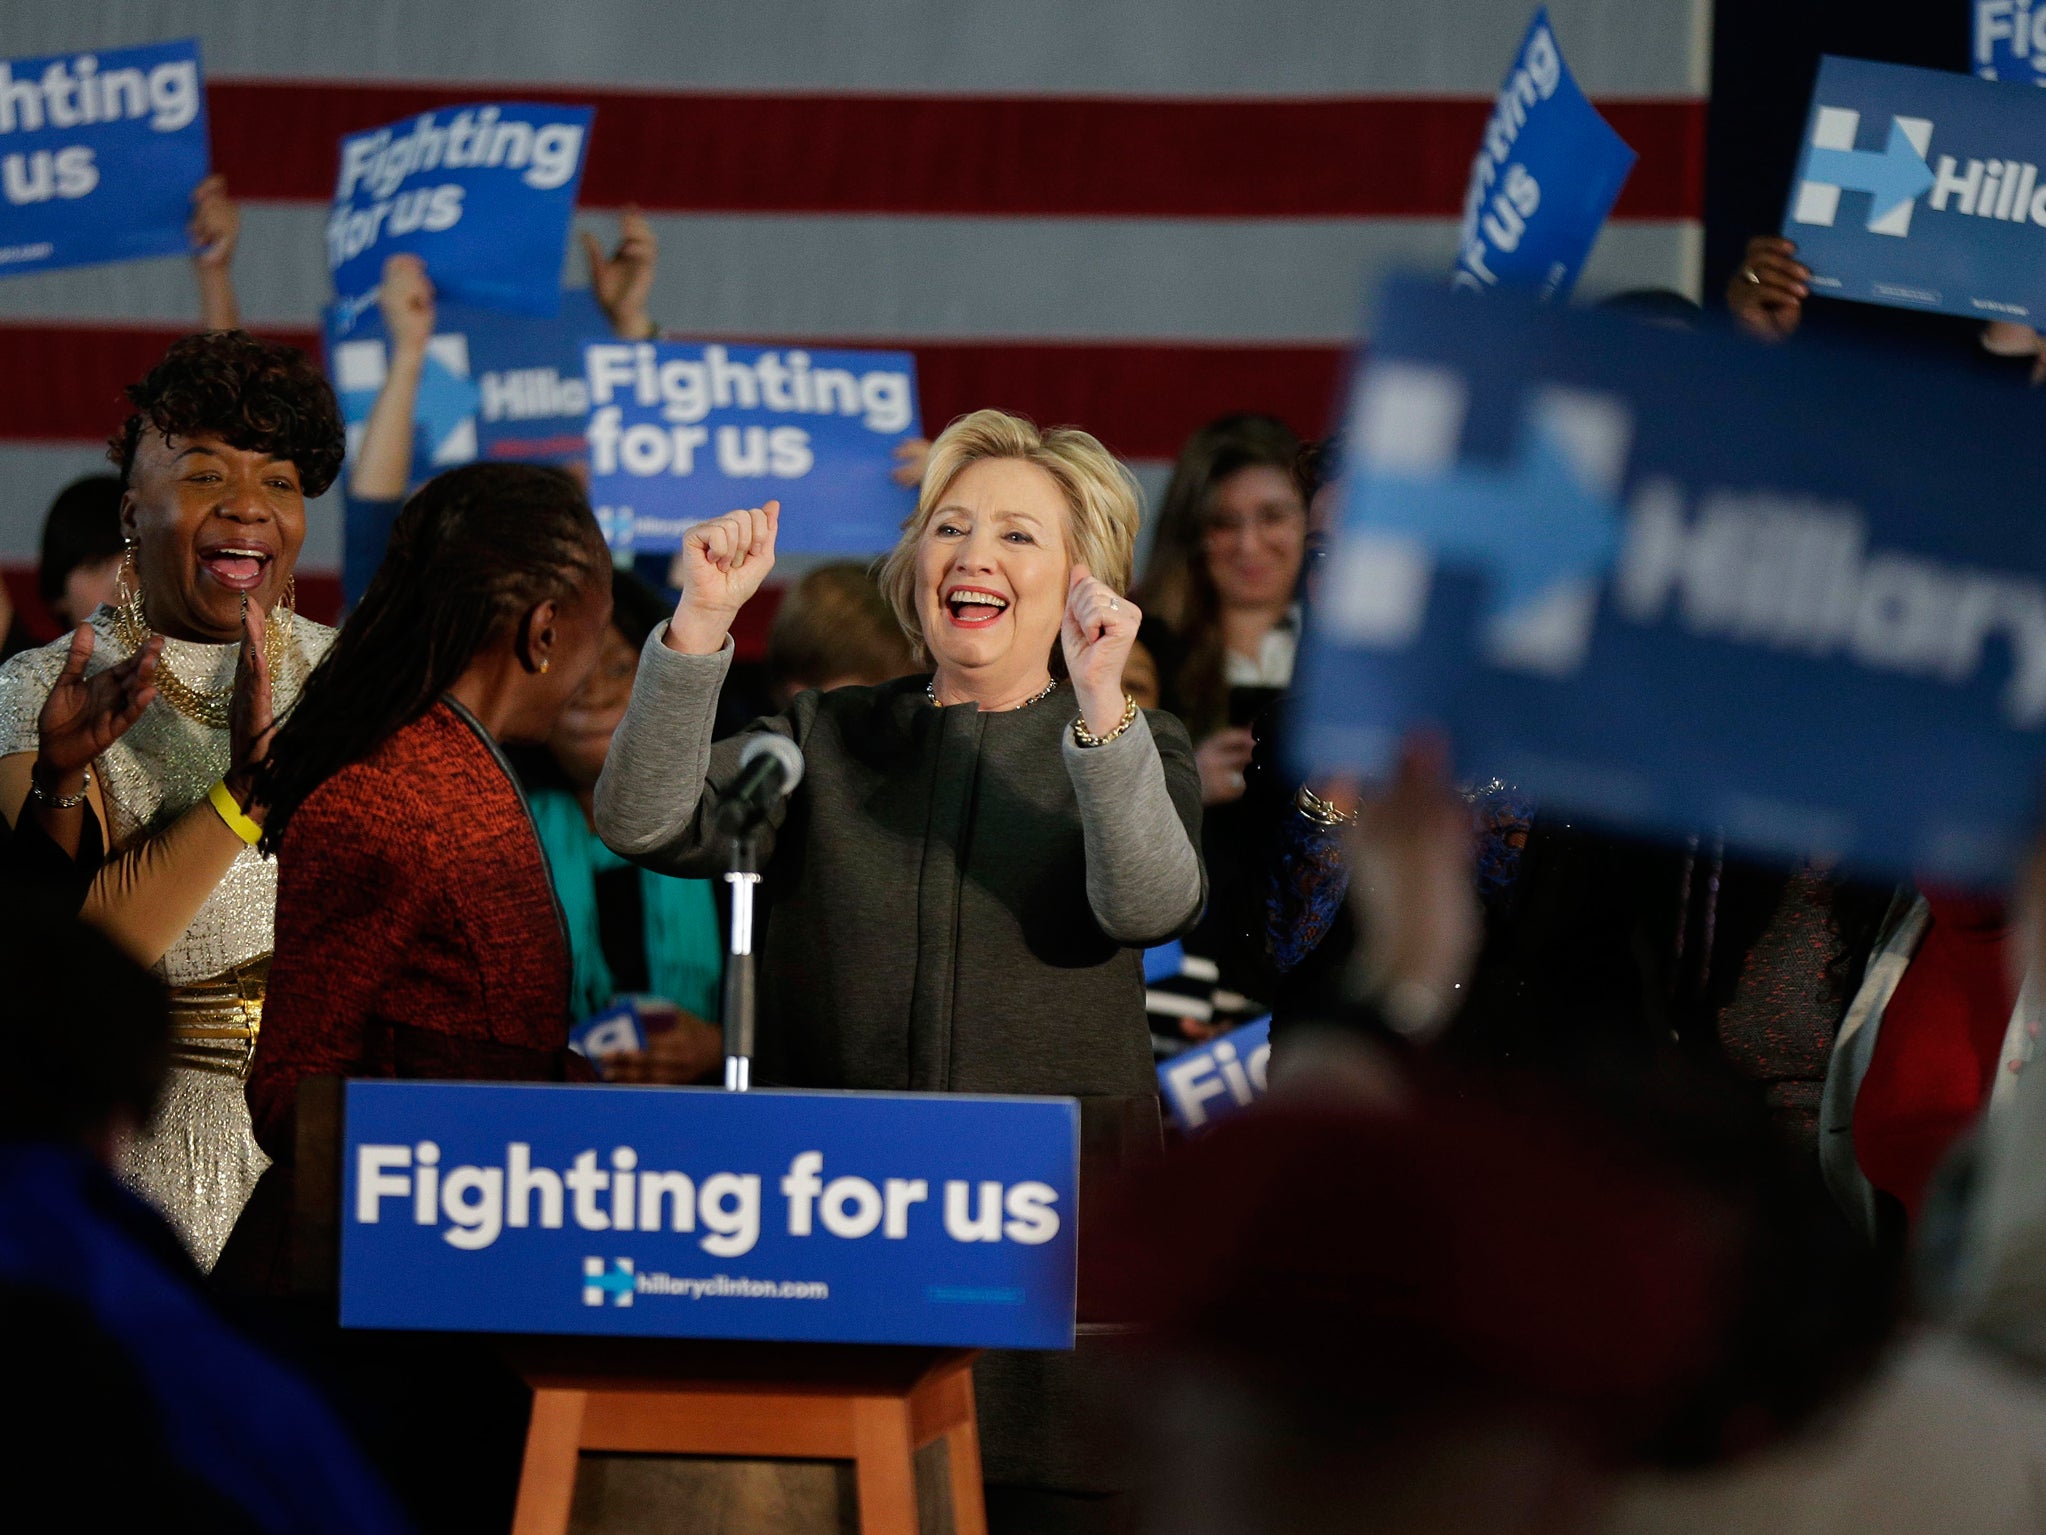 Hillary Clinton steps to the podium as she is introduced to an room of excited supporters AP